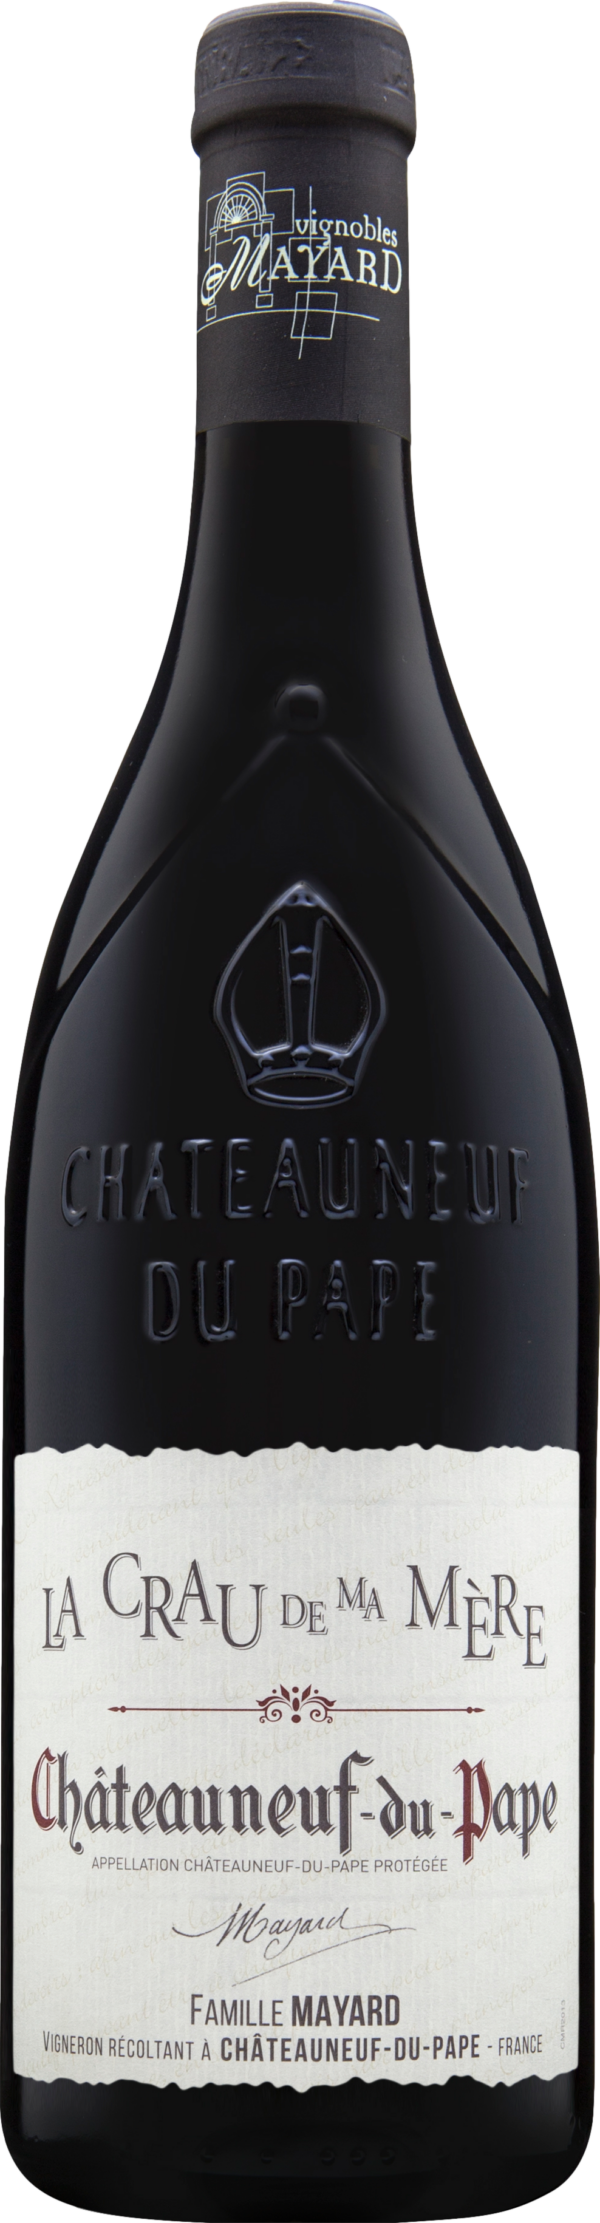 Product image of Vignobles Mayard Chateauneuf du Pape La Crau de Ma Mere 2018 from 8wines